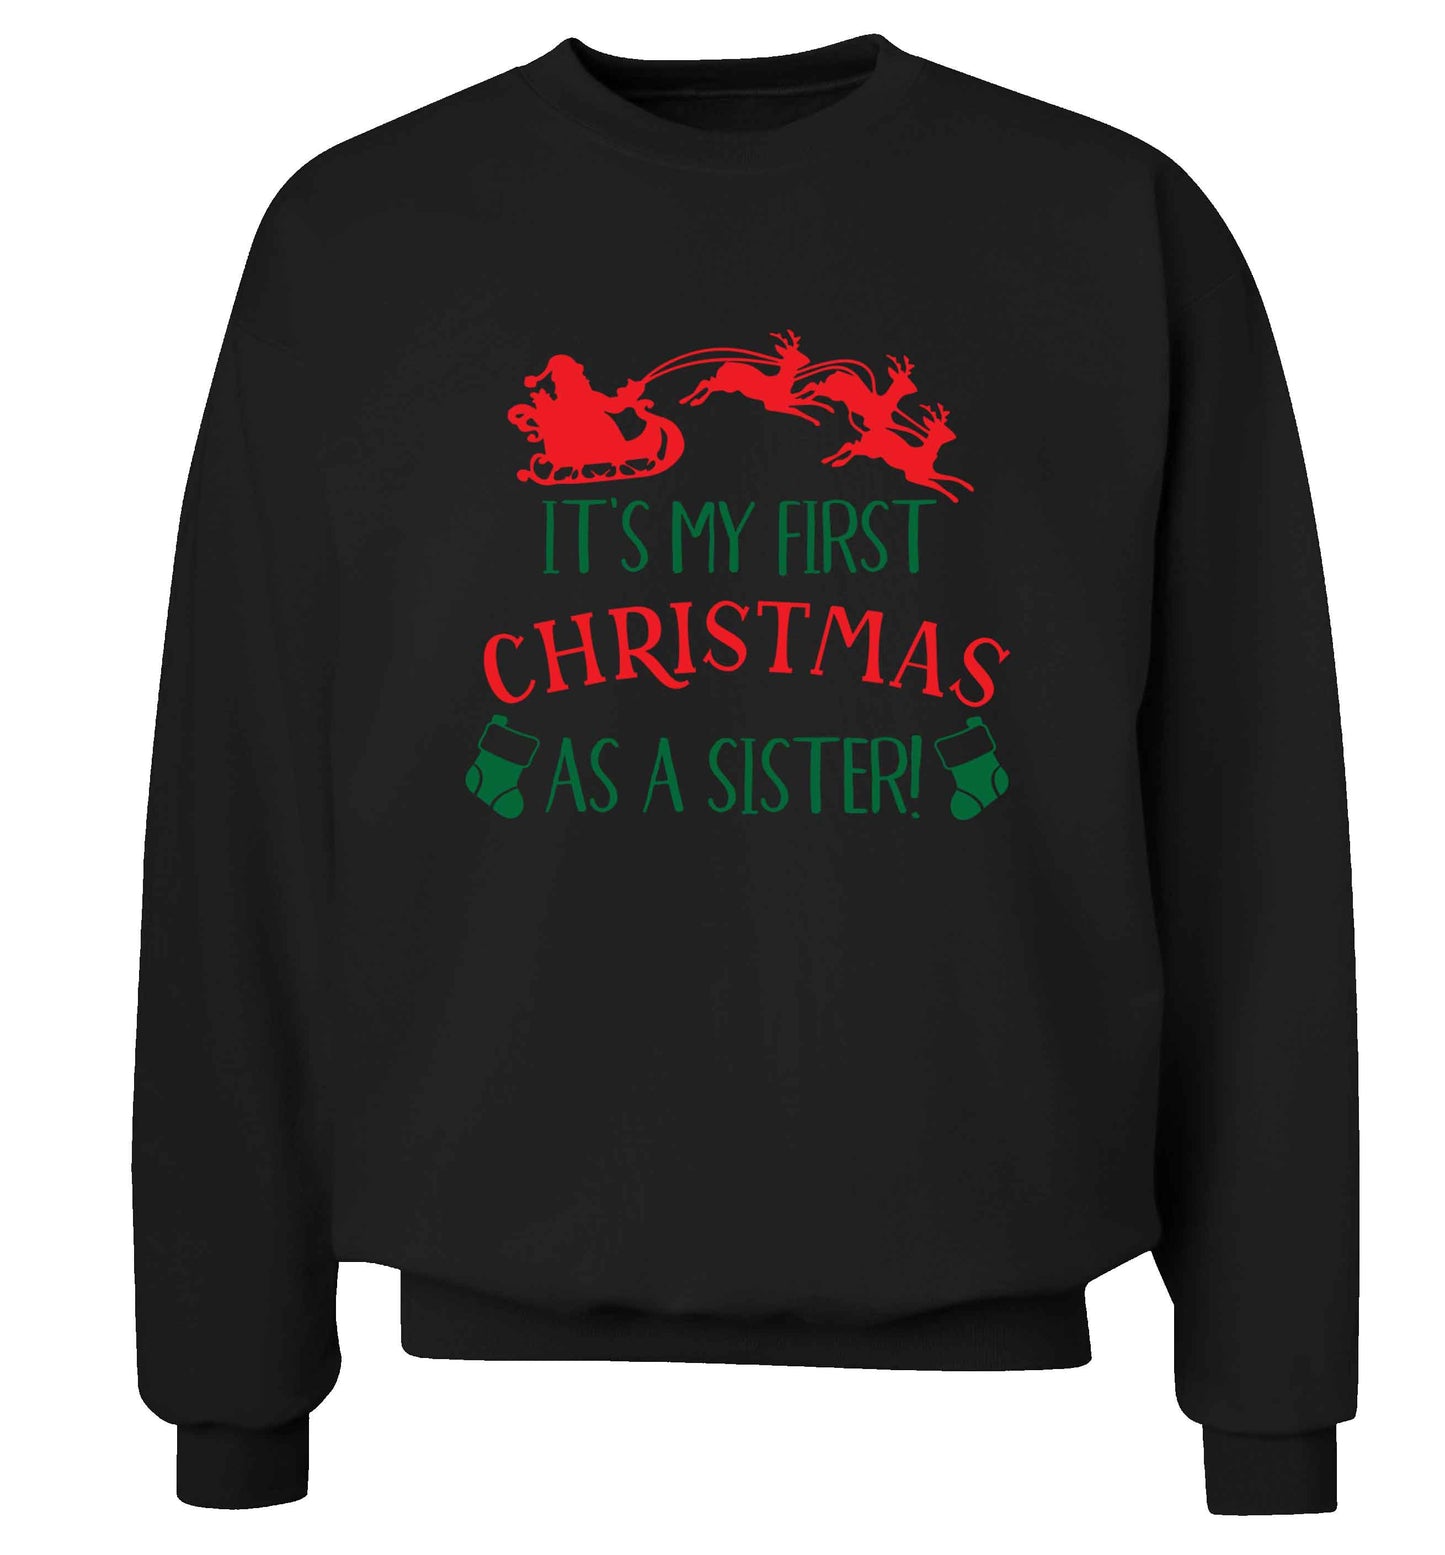 It's my first Christmas as a sister! Adult's unisex black Sweater 2XL